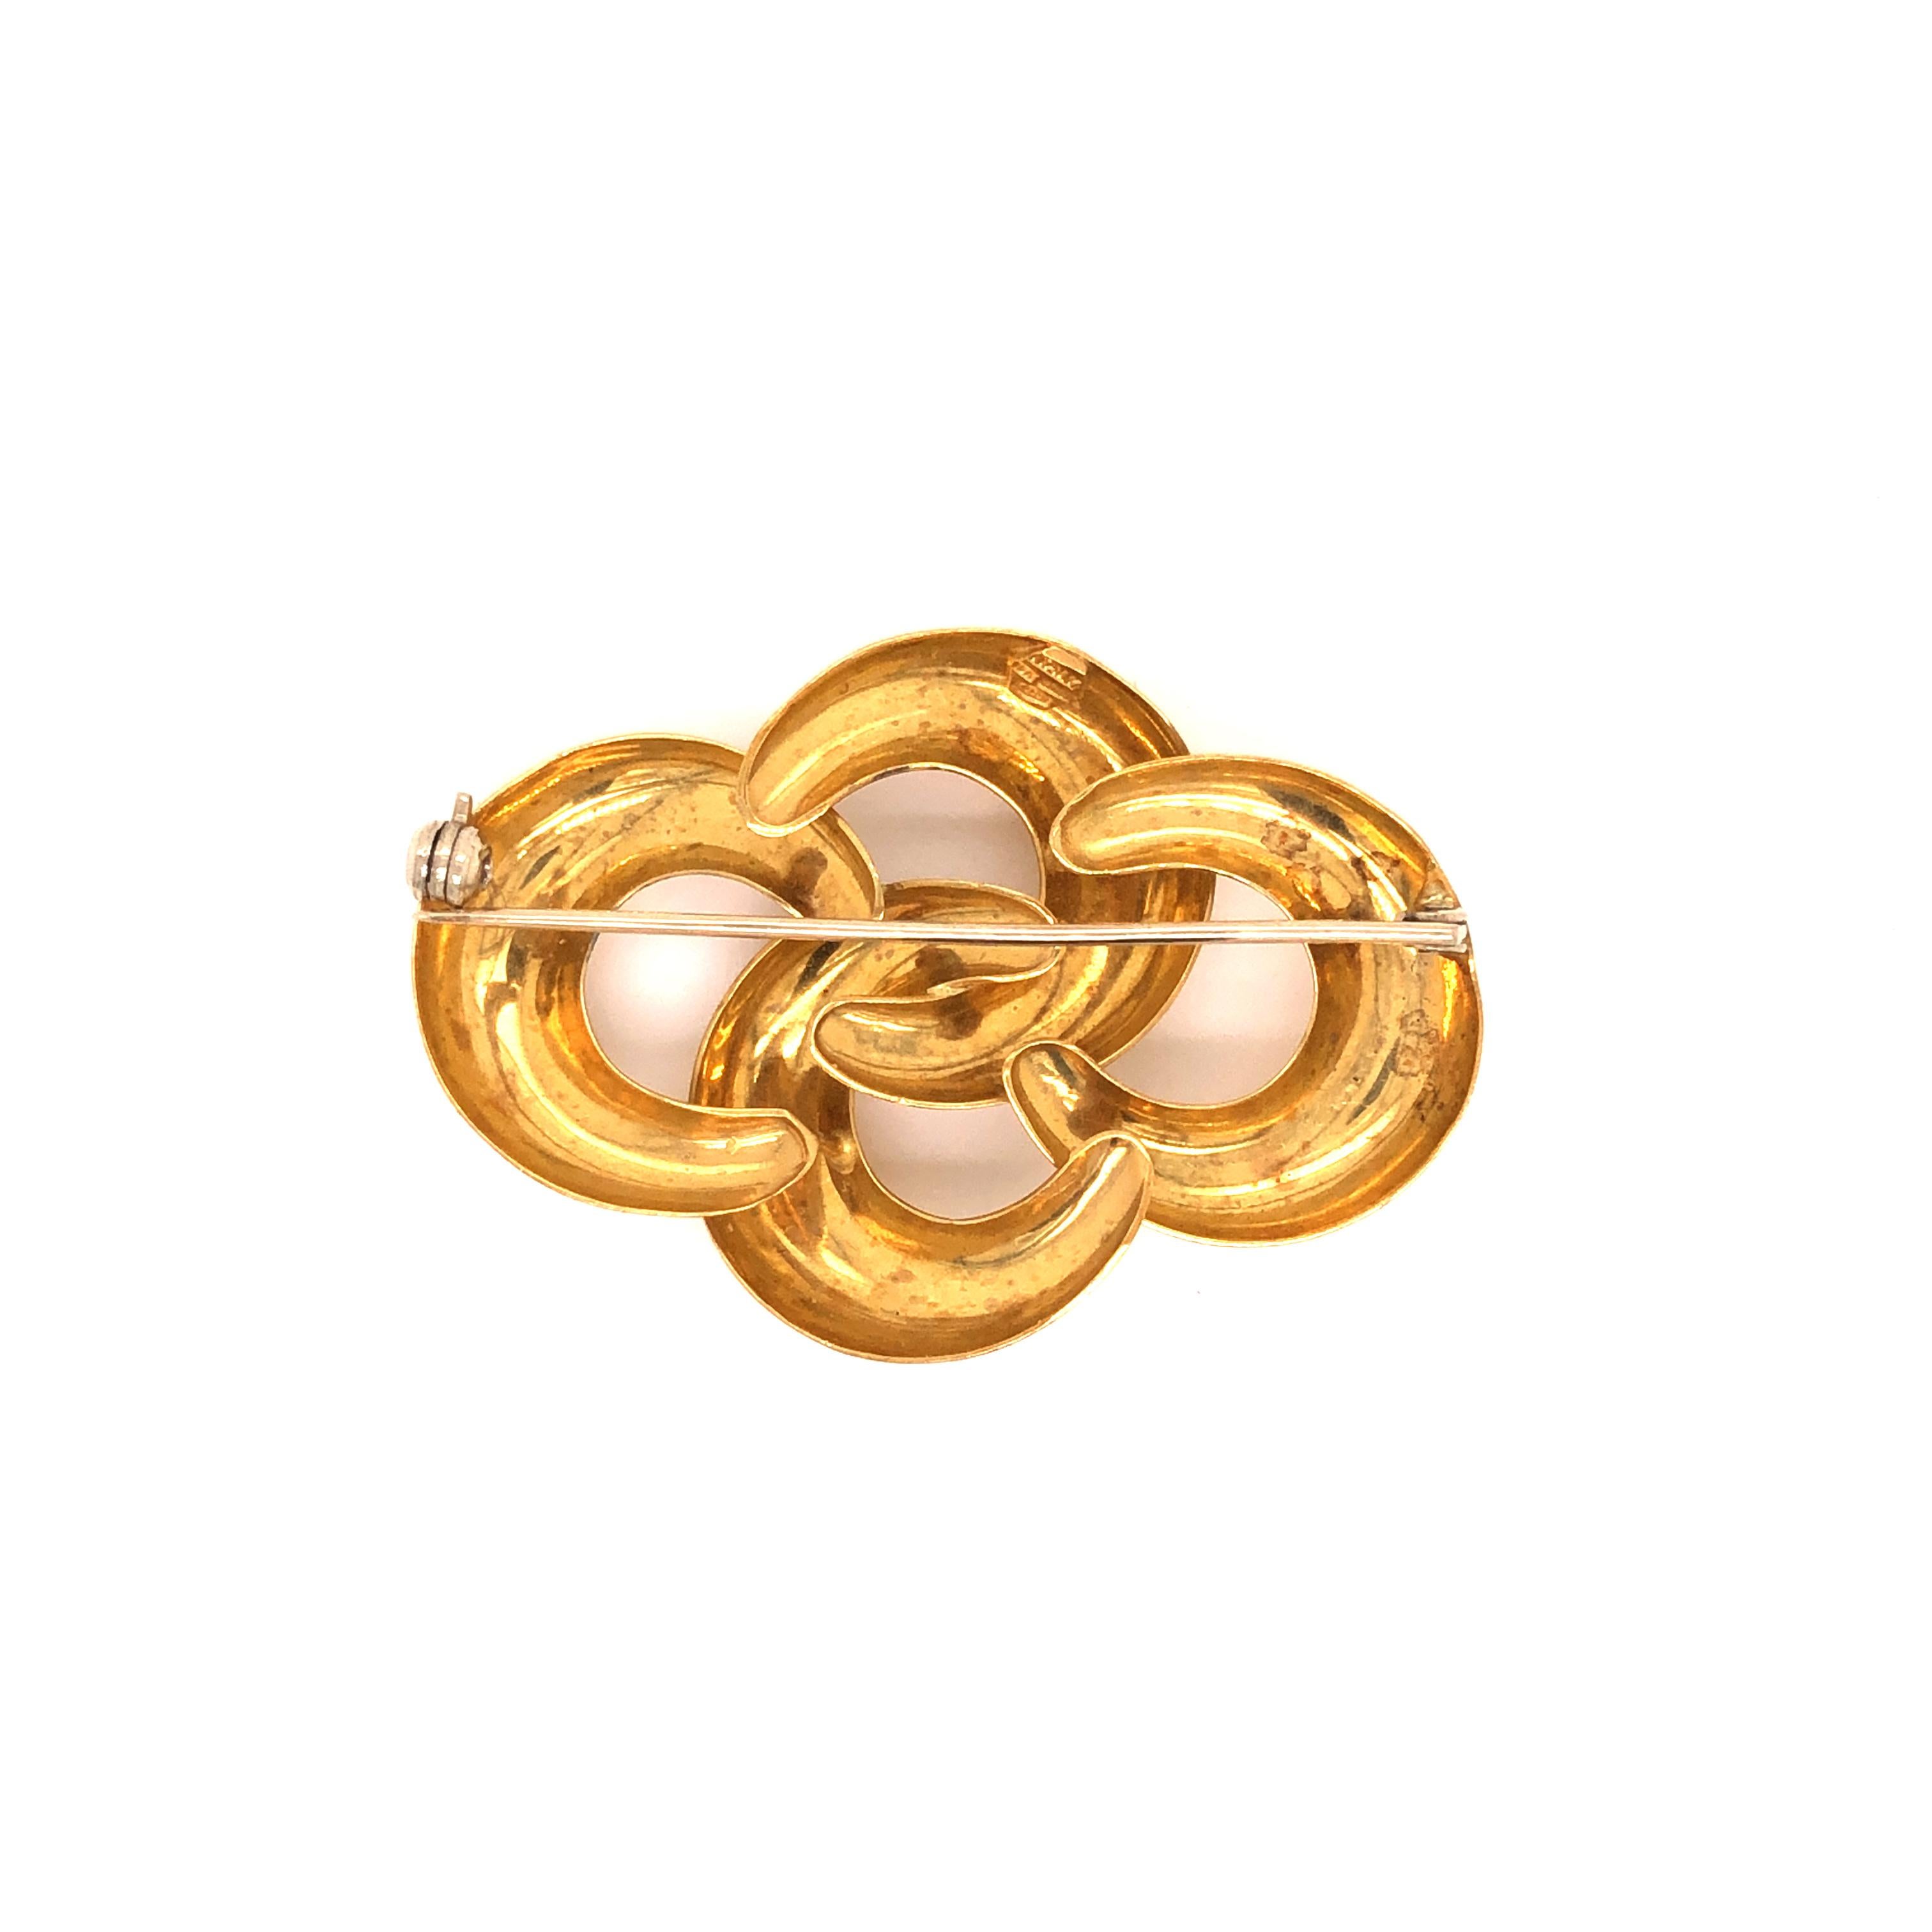 18K Yellow Gold Brooch

Metal: 18K Yellow Gold

Size: 1 3/4